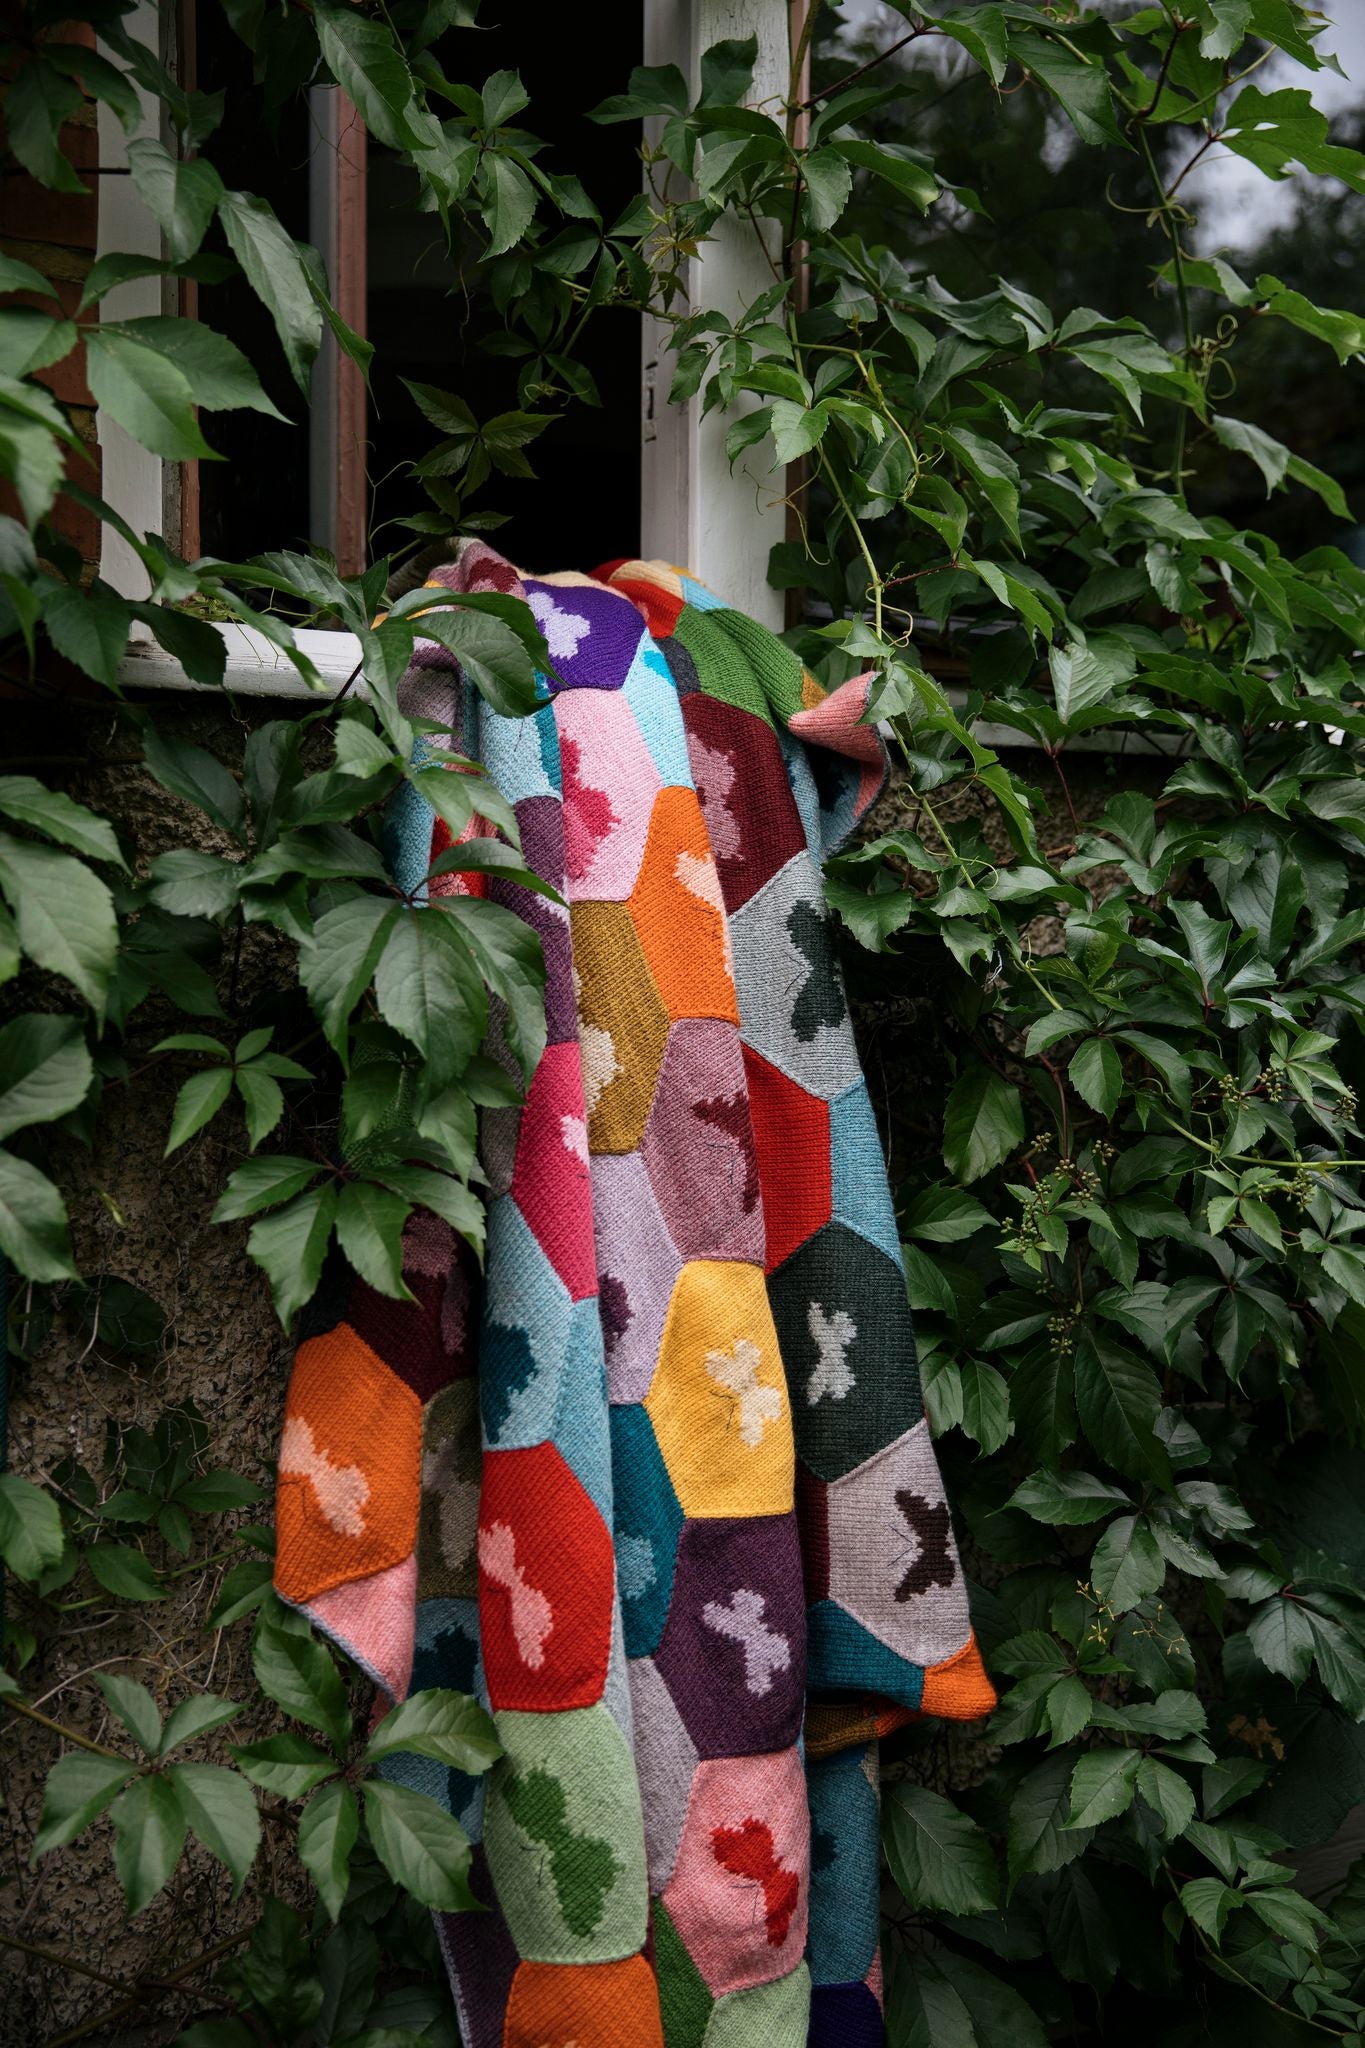 The Knitted Fabric: Colorwork Projects for You and Your Home by Dee Hardwicke